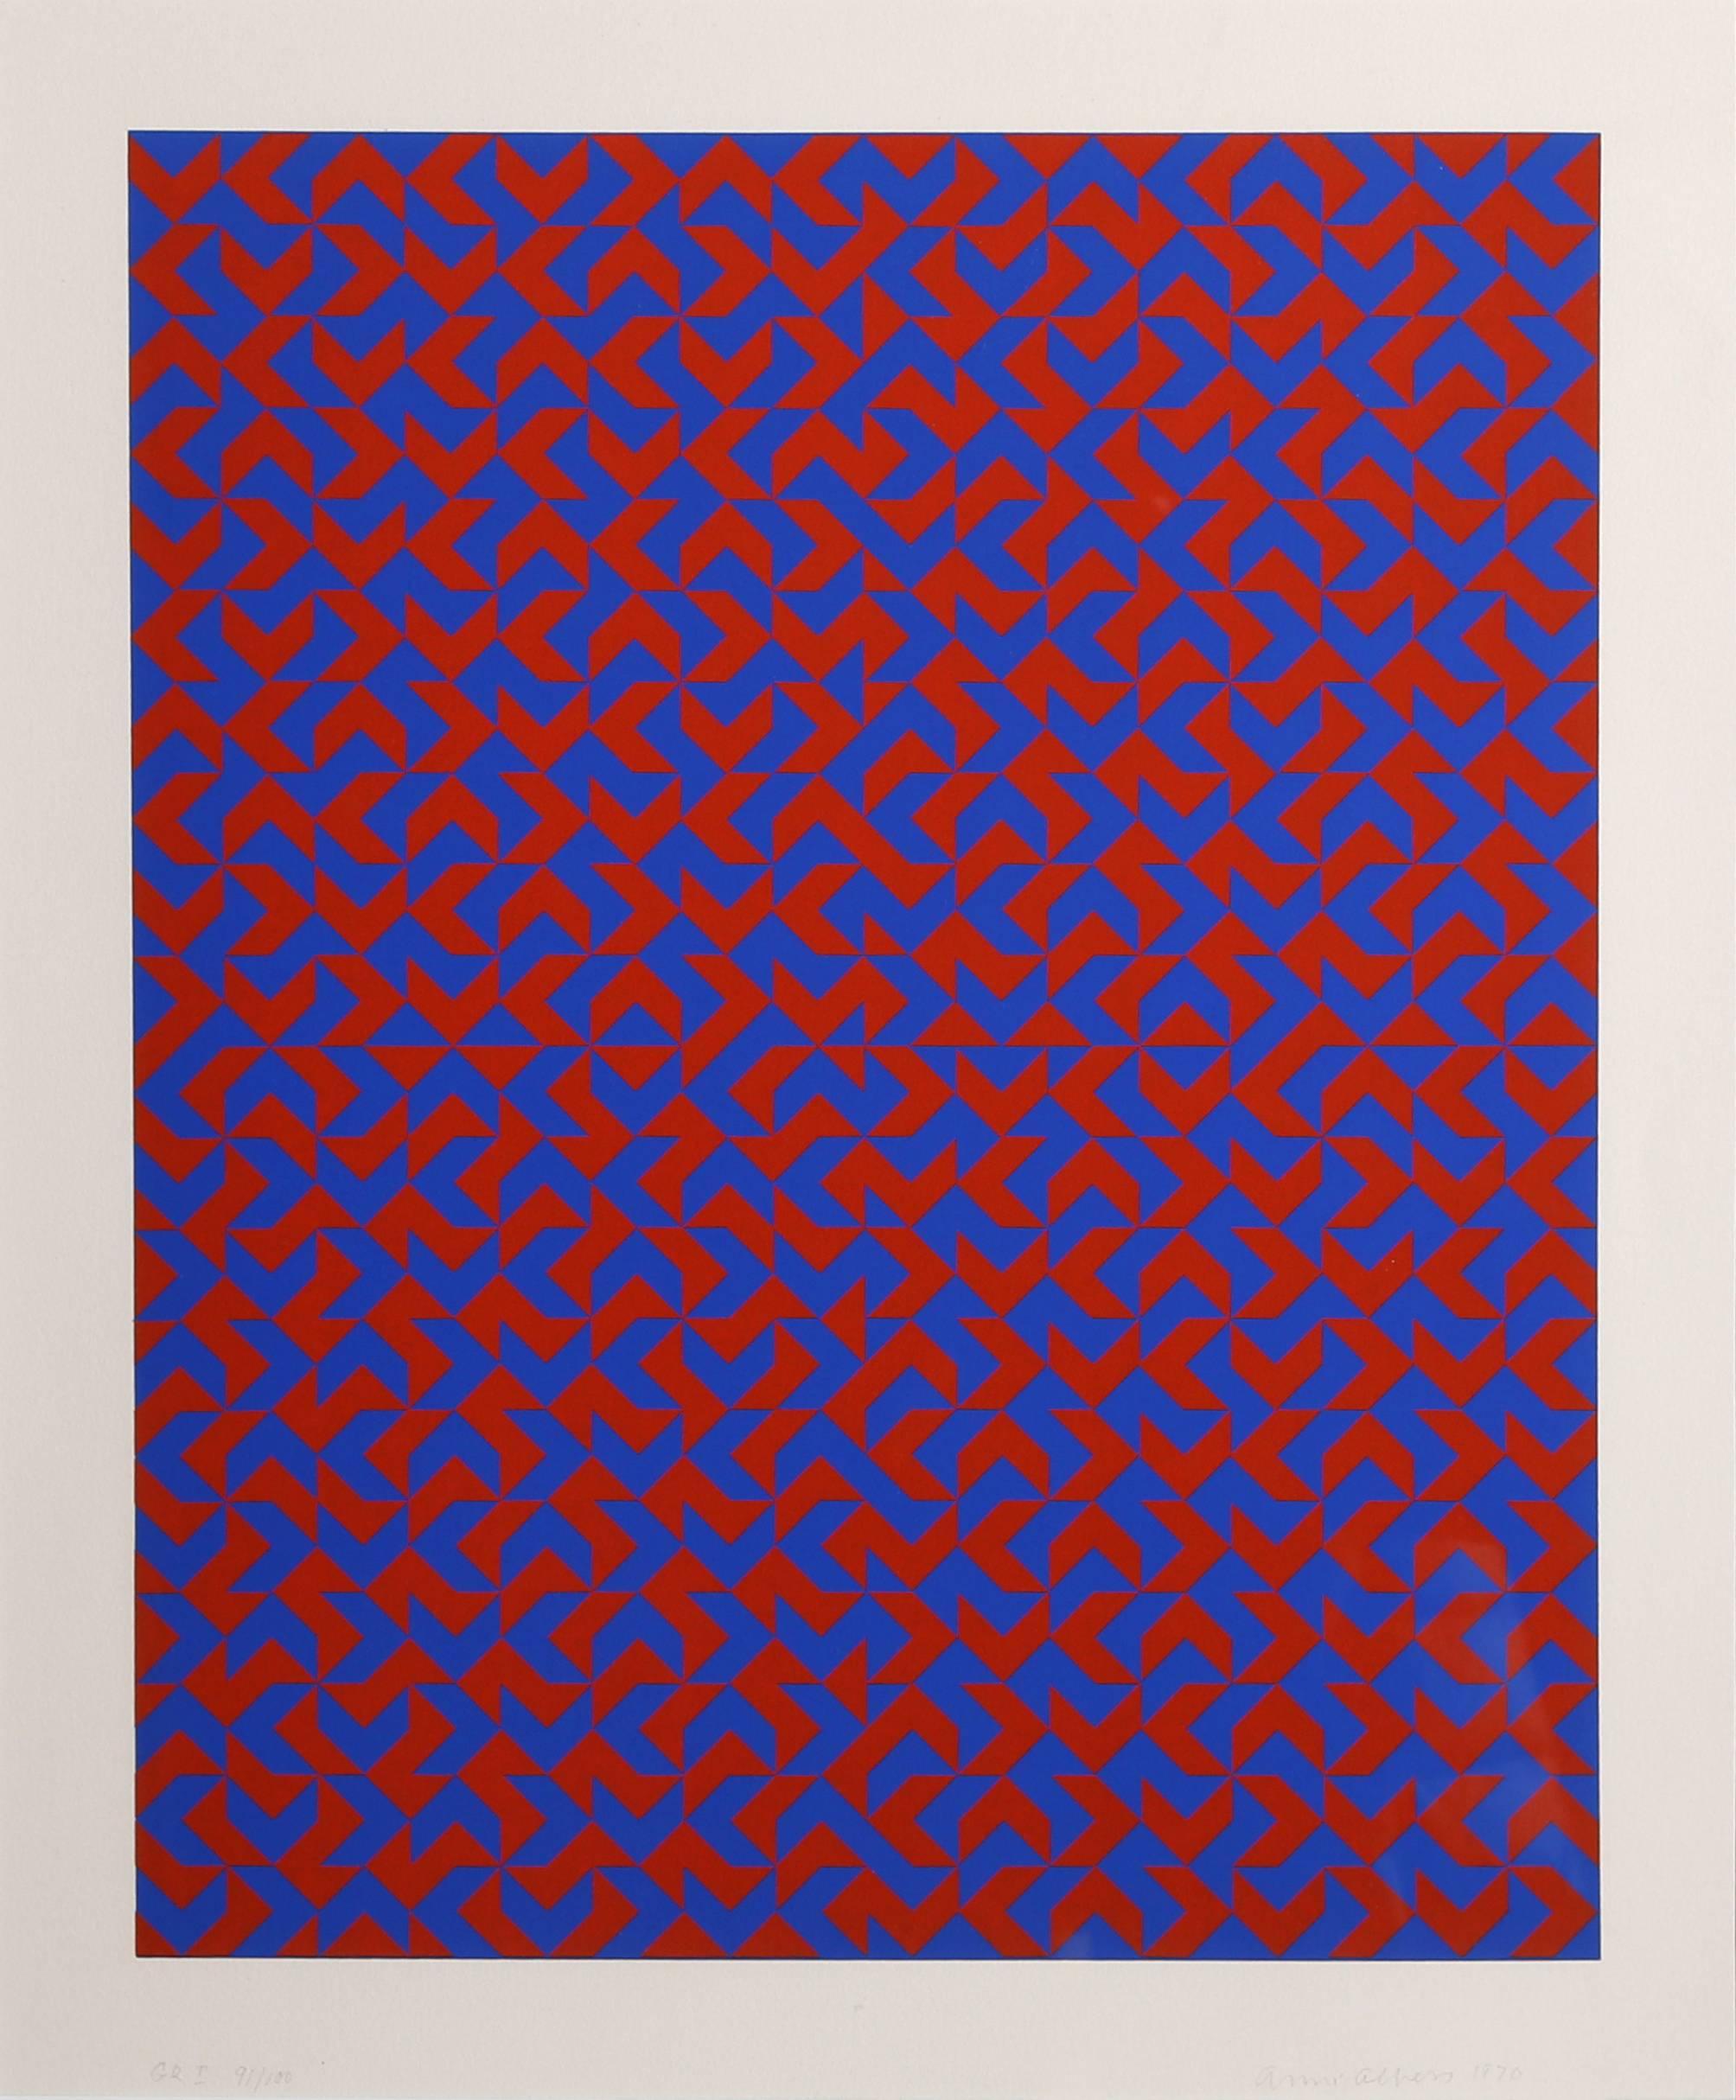 Artist: Anni Albers, German/American (1899 - 1994)
Title: GR I
Year: 1970
Medium: Silkscreen on Arches Paper, signed and numbered in pencil
Edition: 45/100
Image Size: 20 x 16 inches
Size: 29 x 24 in. (73.66 x 60.96 cm)